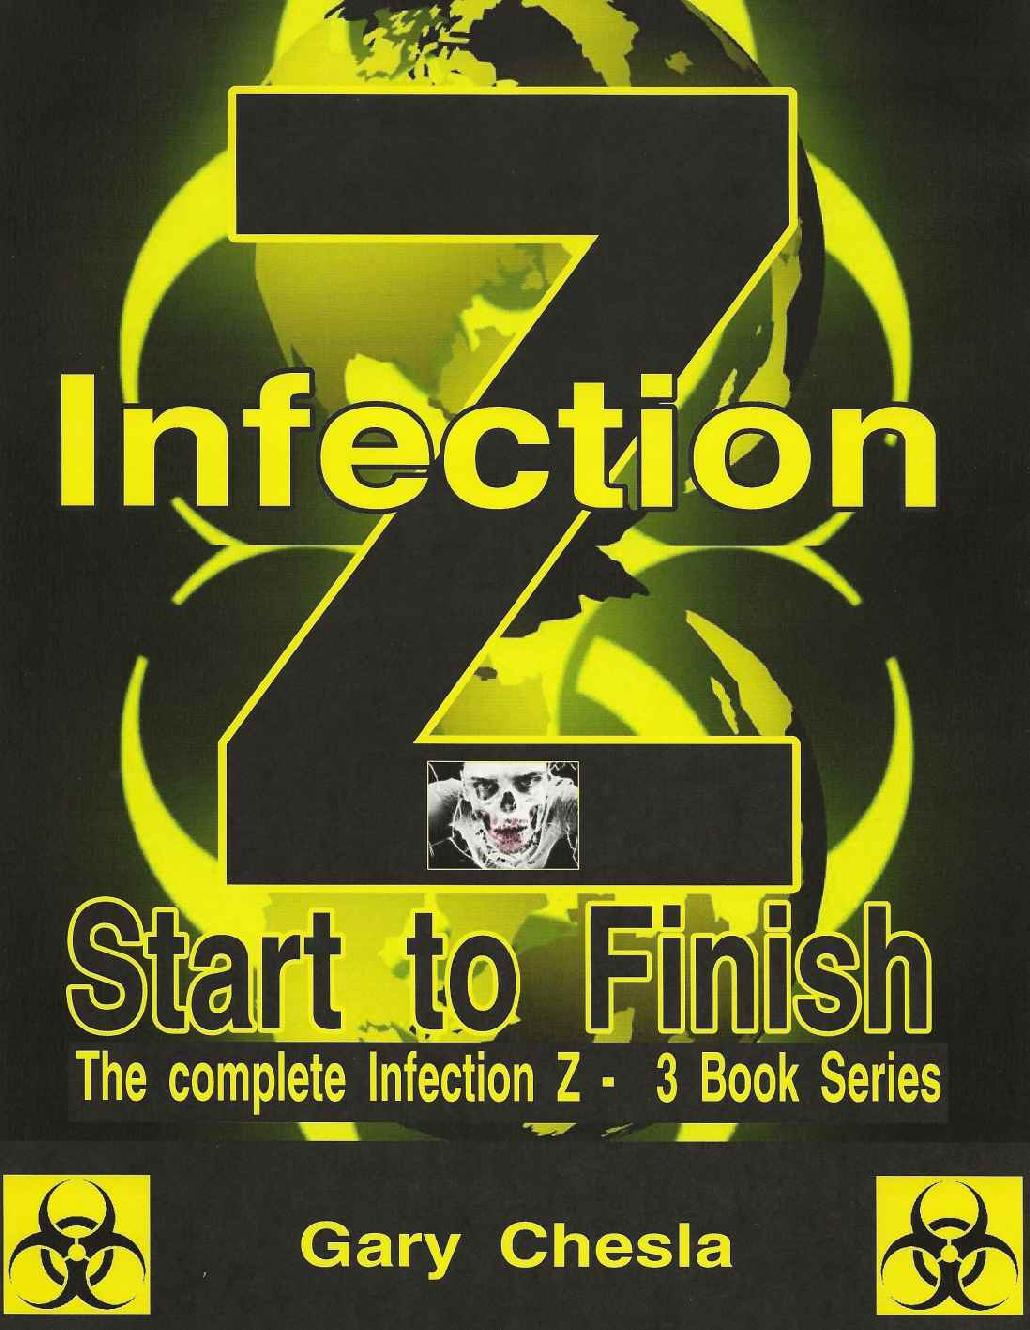 Infection Z: Start to Finish